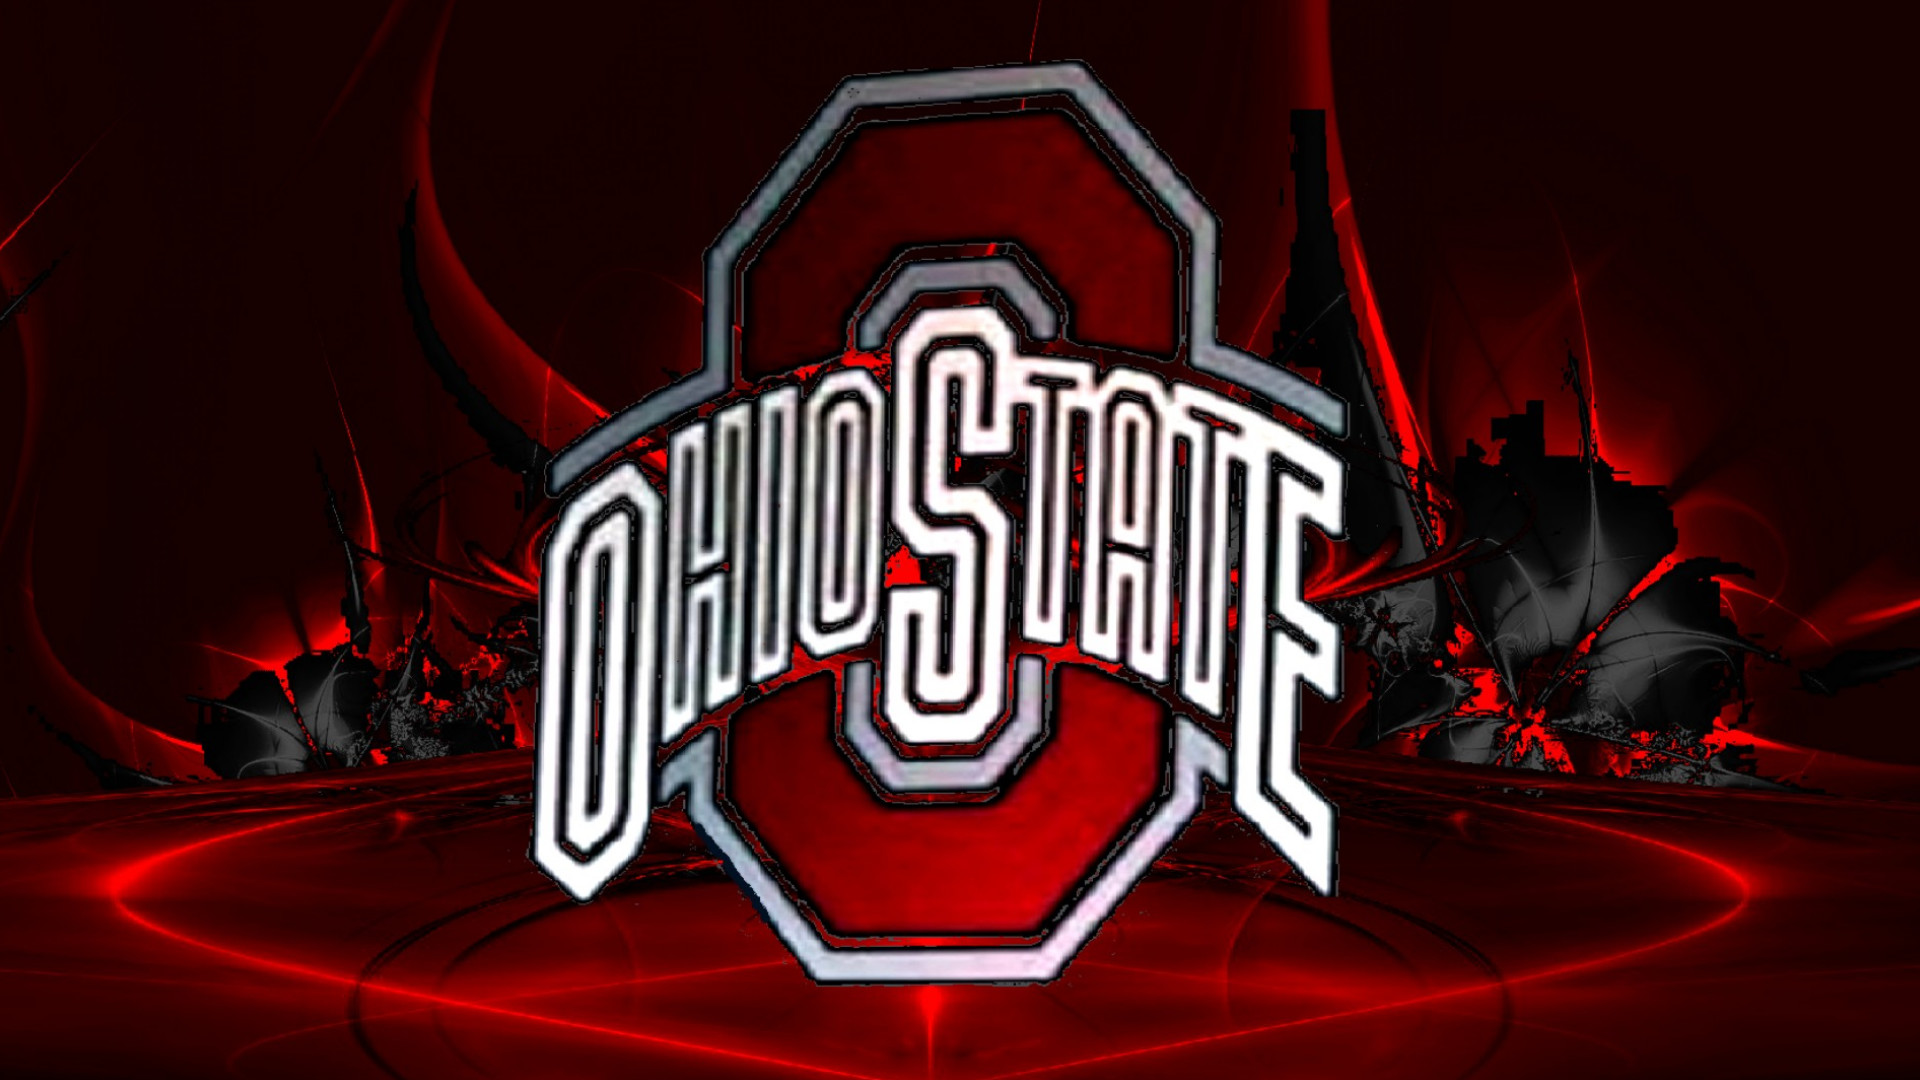 1920x1080 Ohio State Buckeyes images OHIO STATE RED BLOCK O ON AN ABSTRACT HD  wallpaper and background photos